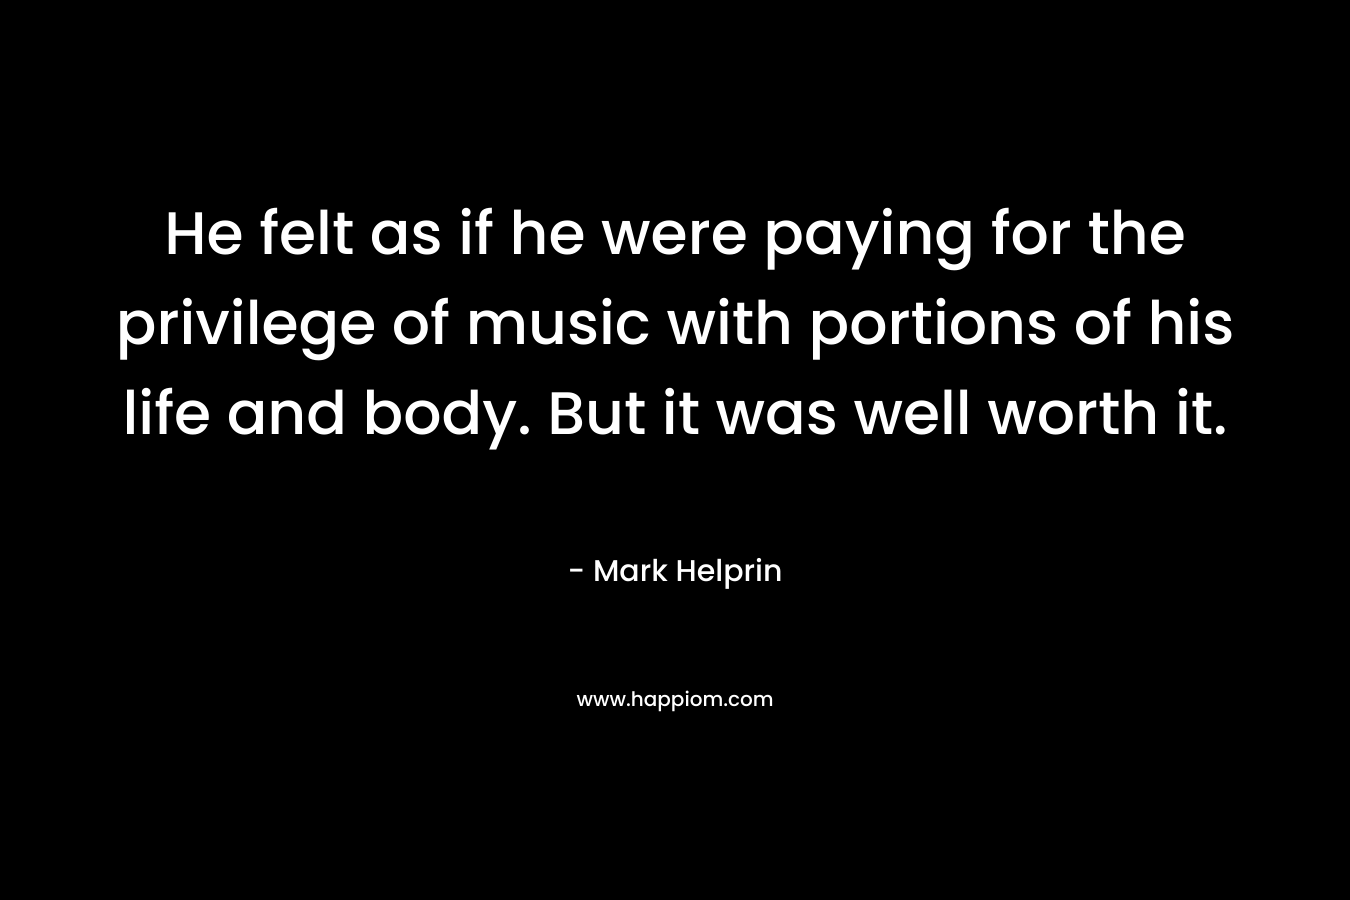 He felt as if he were paying for the privilege of music with portions of his life and body. But it was well worth it. – Mark Helprin